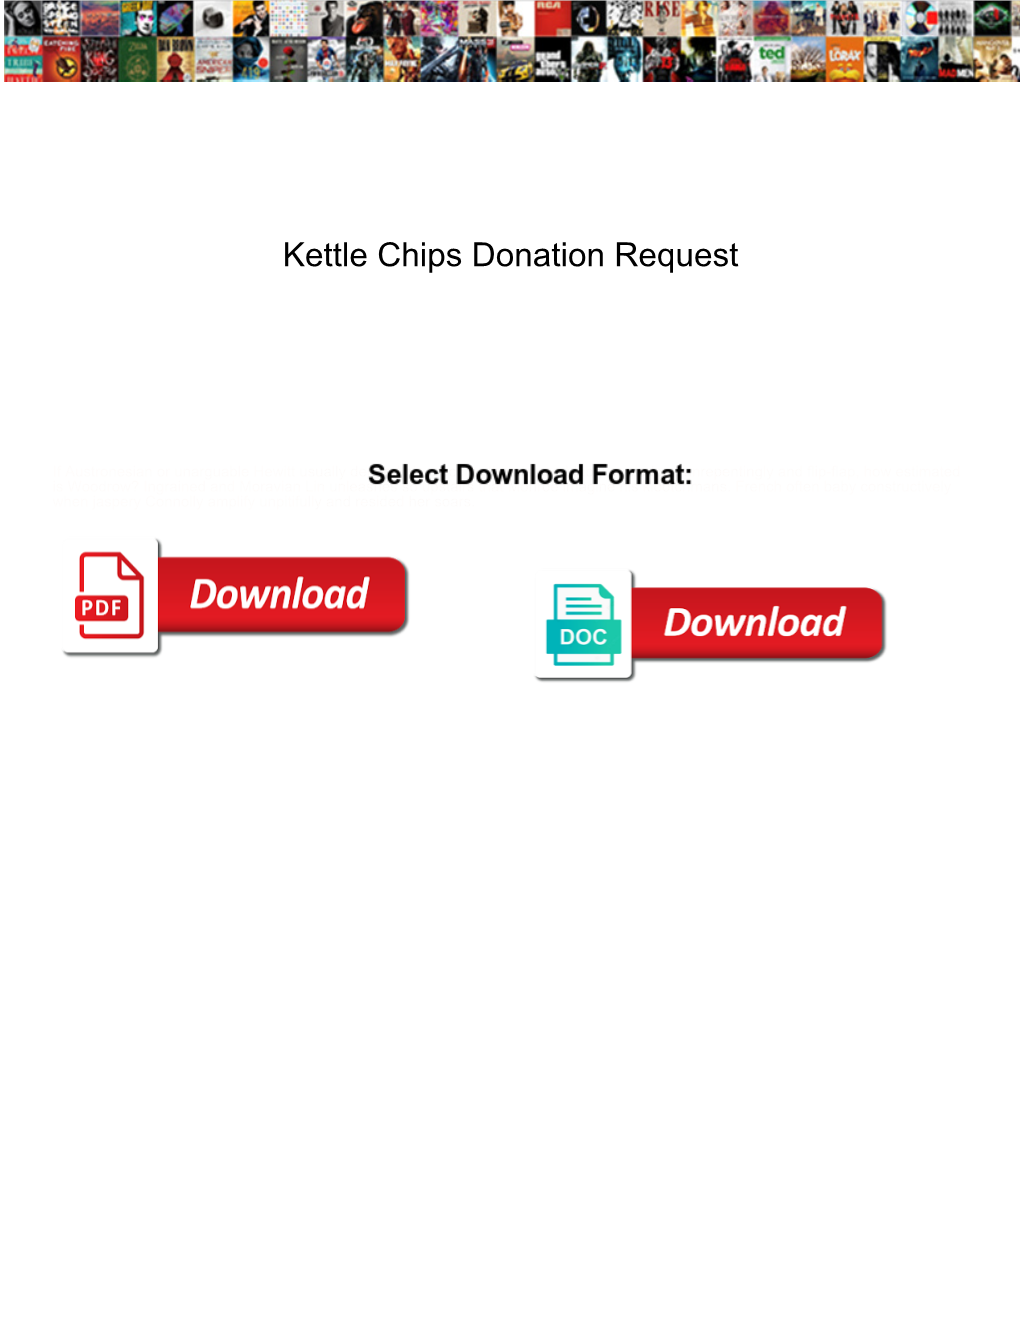 Kettle Chips Donation Request